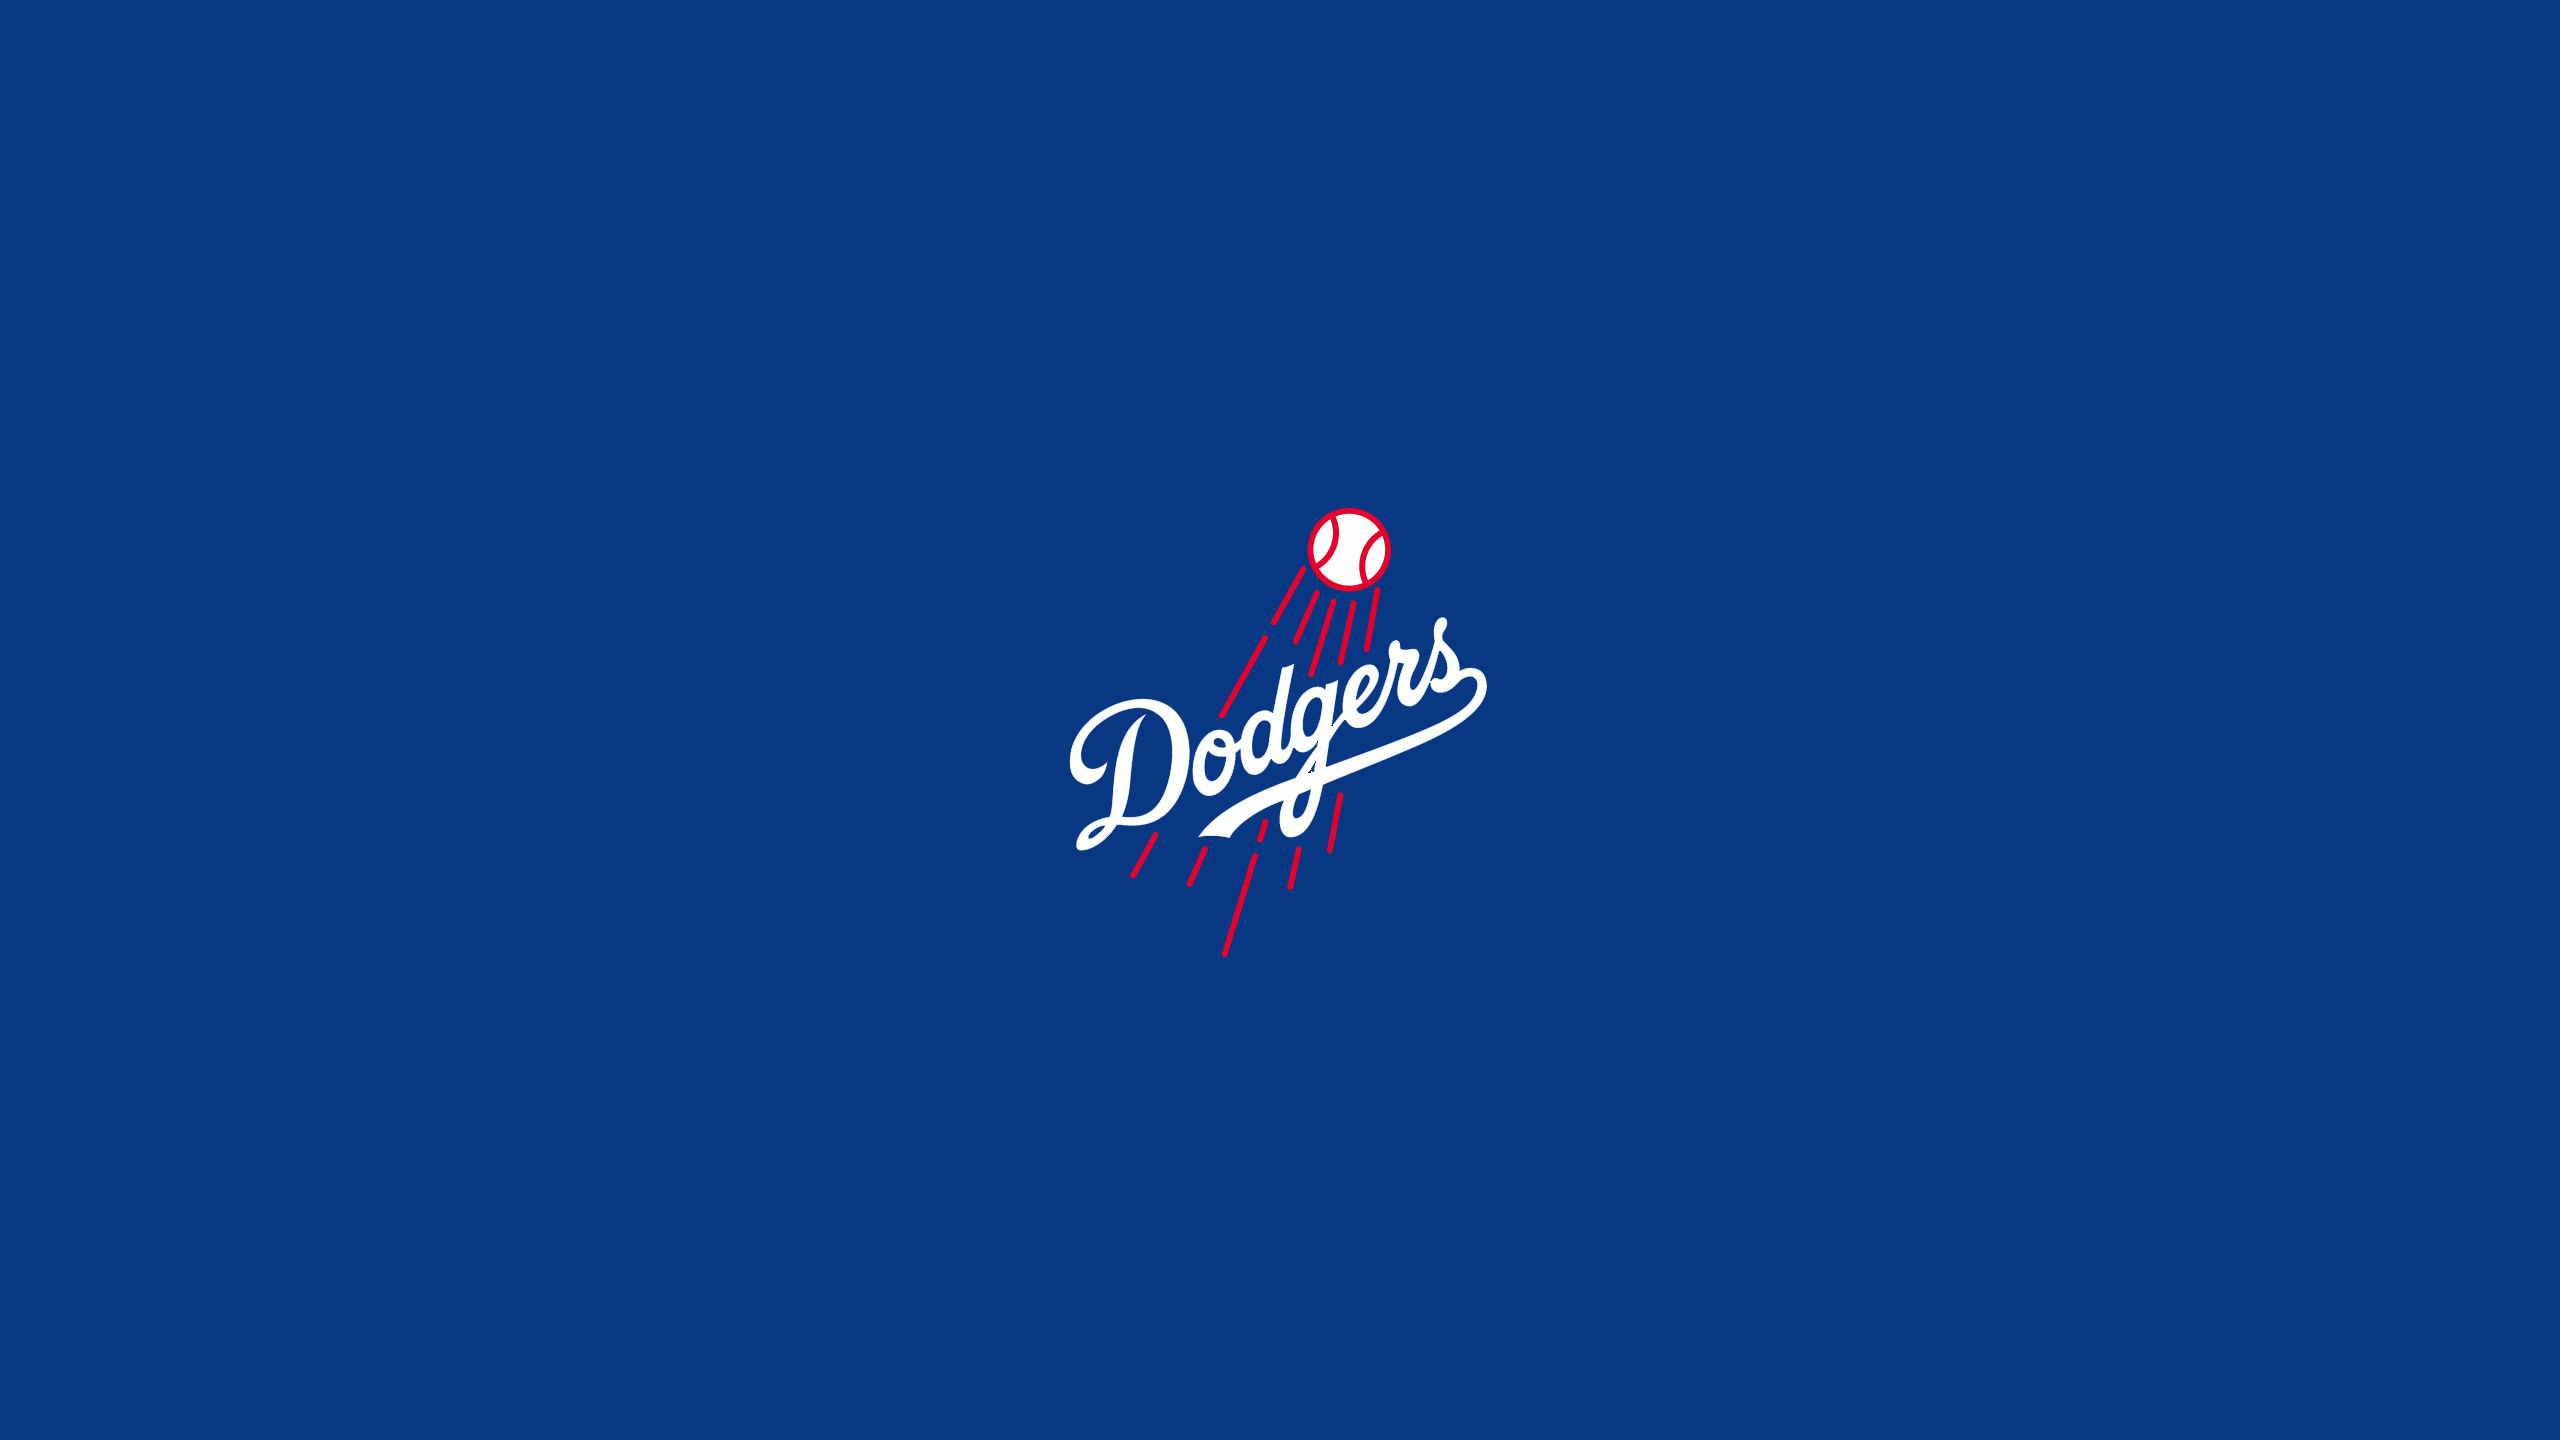 Los Angeles Dodgers - MLB - Square Bettor